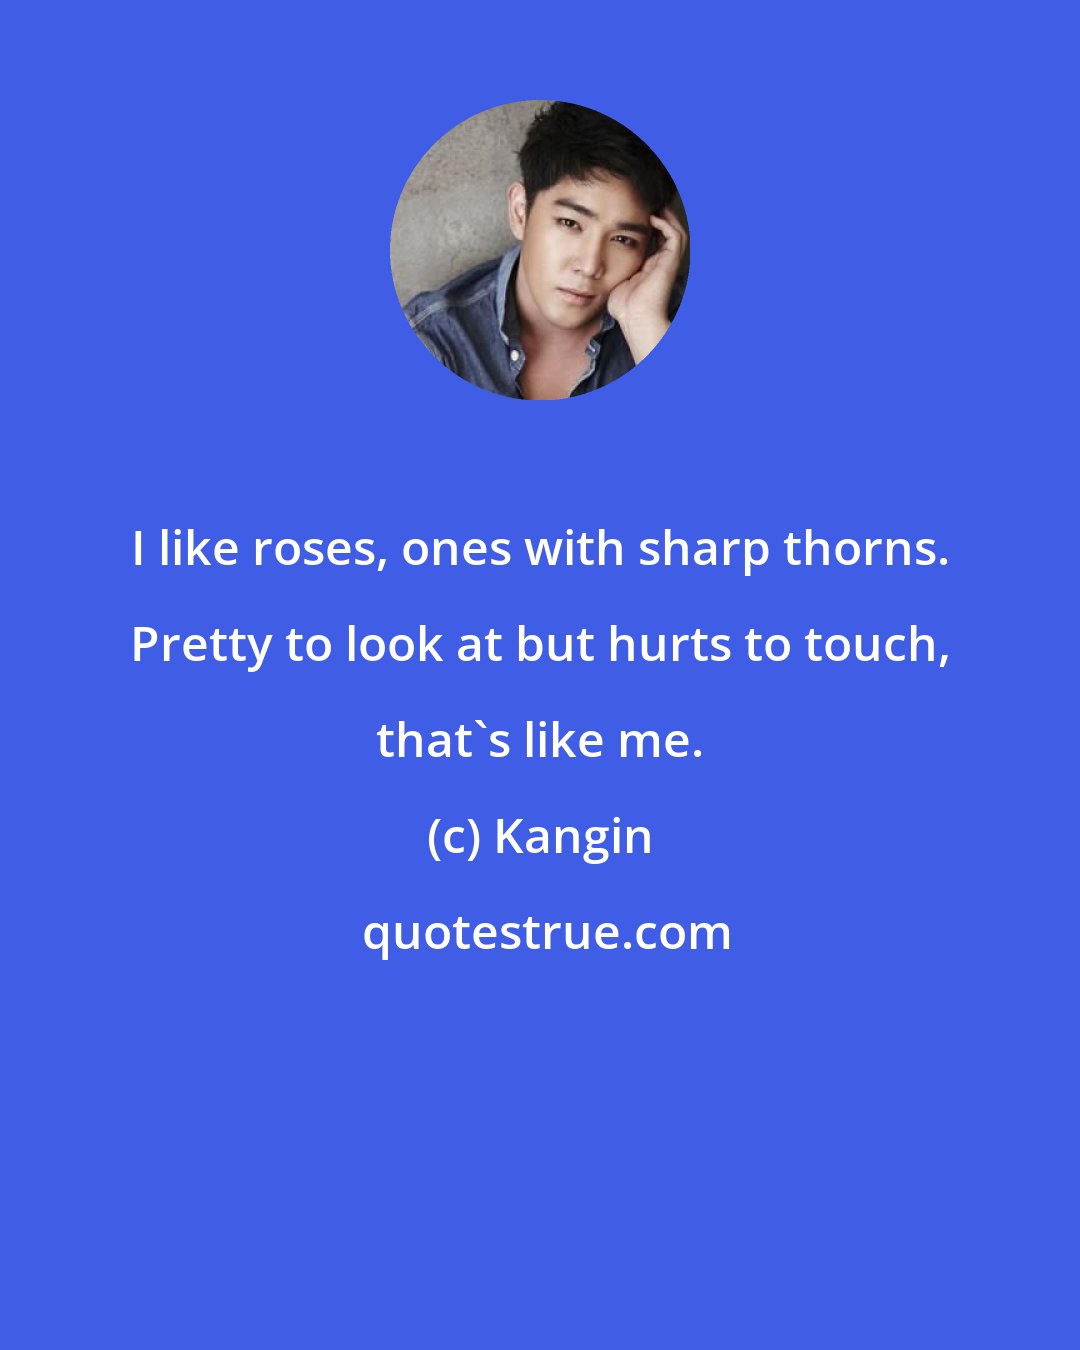 Kangin: I like roses, ones with sharp thorns. Pretty to look at but hurts to touch, that's like me.